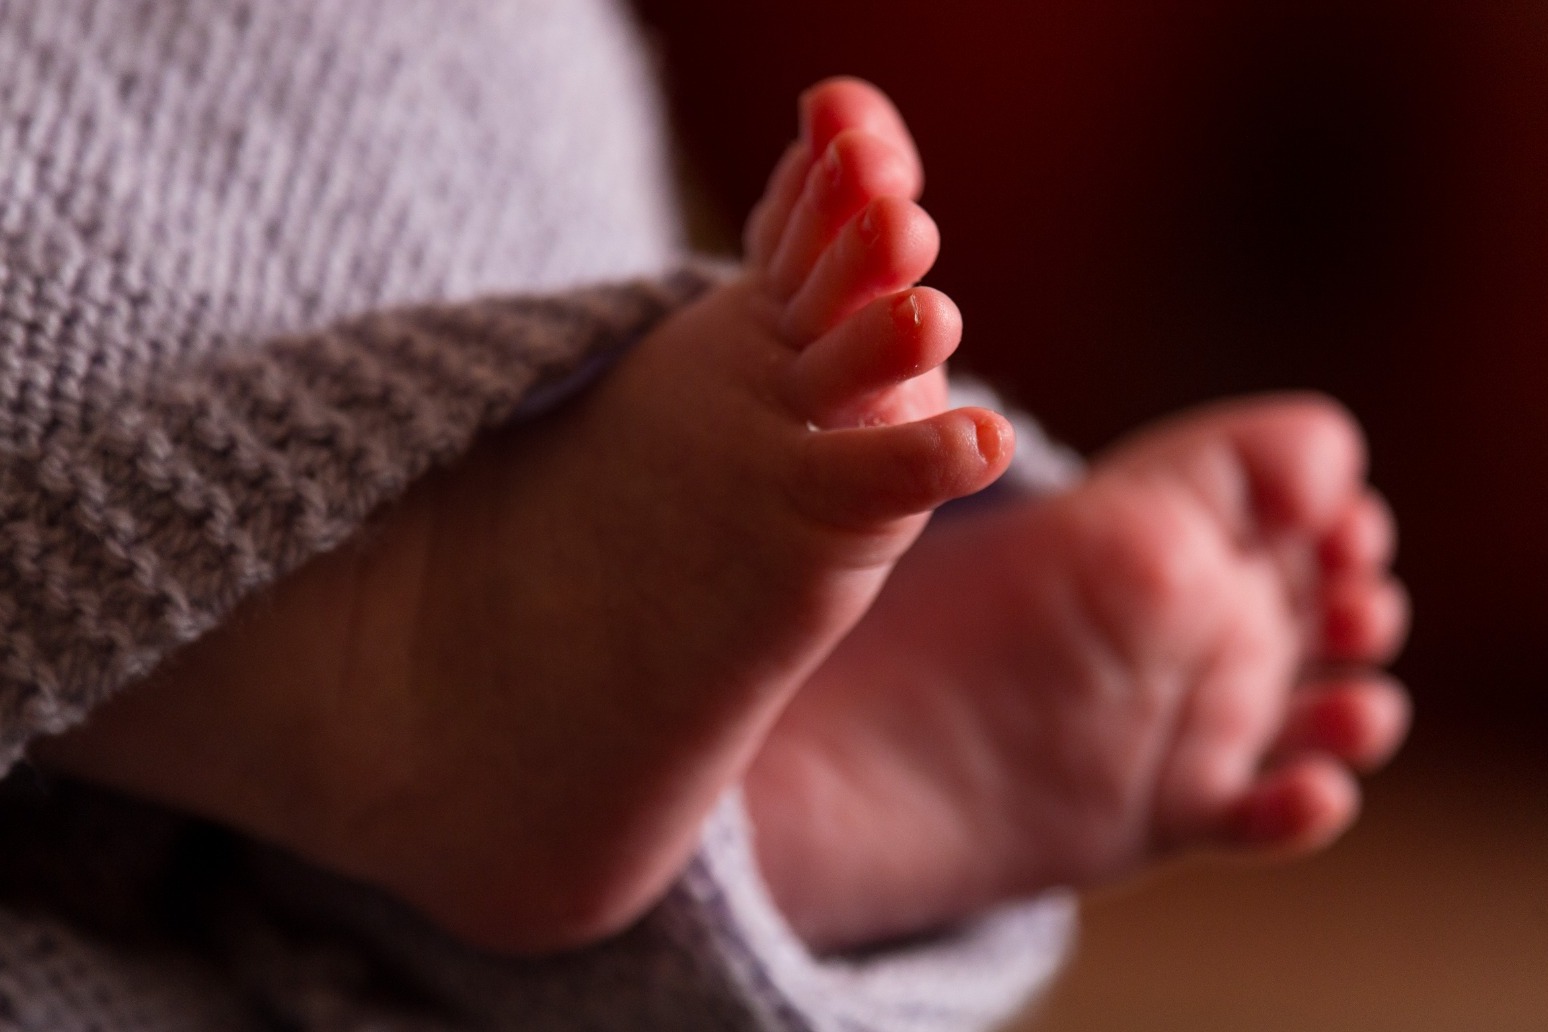 Call for newborn screening programme to be extended 